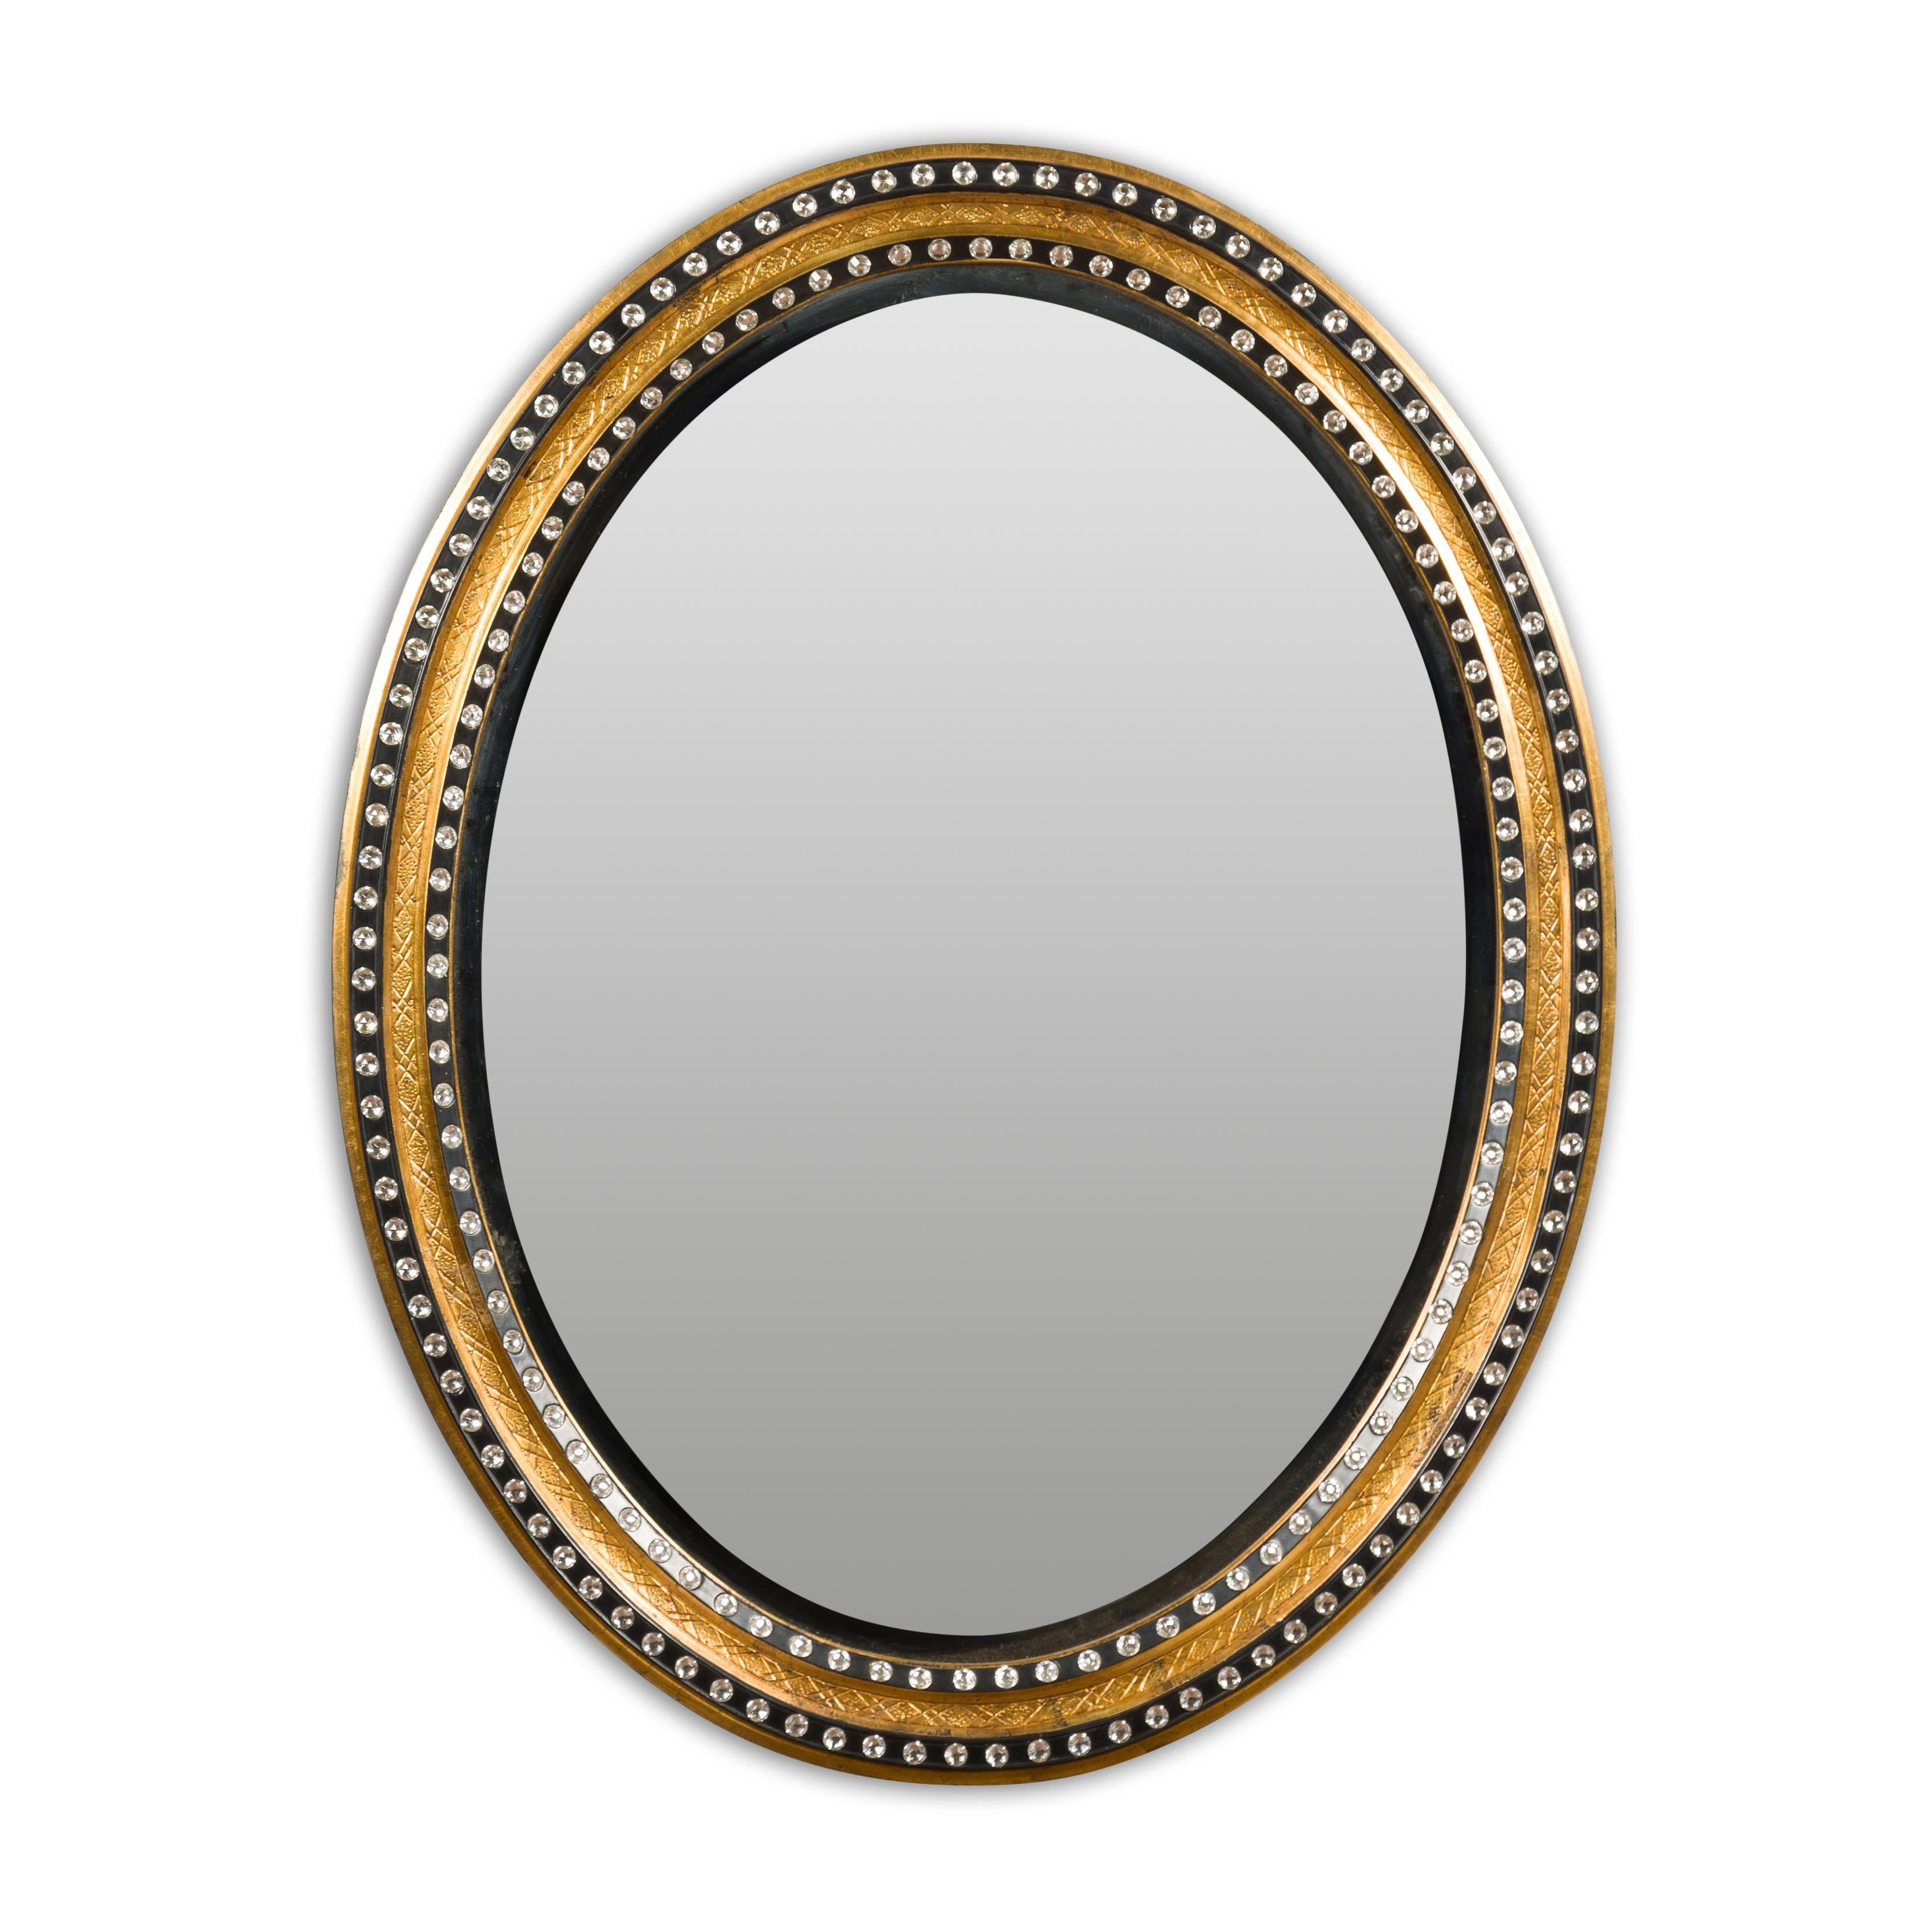 An Irish Midcentury oval shaped mirror with gilded and ebonized wood, adorned with cut glass, diamonté décor. Embodying the eclectic charm of Midcentury design, this Irish oval-shaped mirror is an artful blend of elegance and whimsy. Framed in